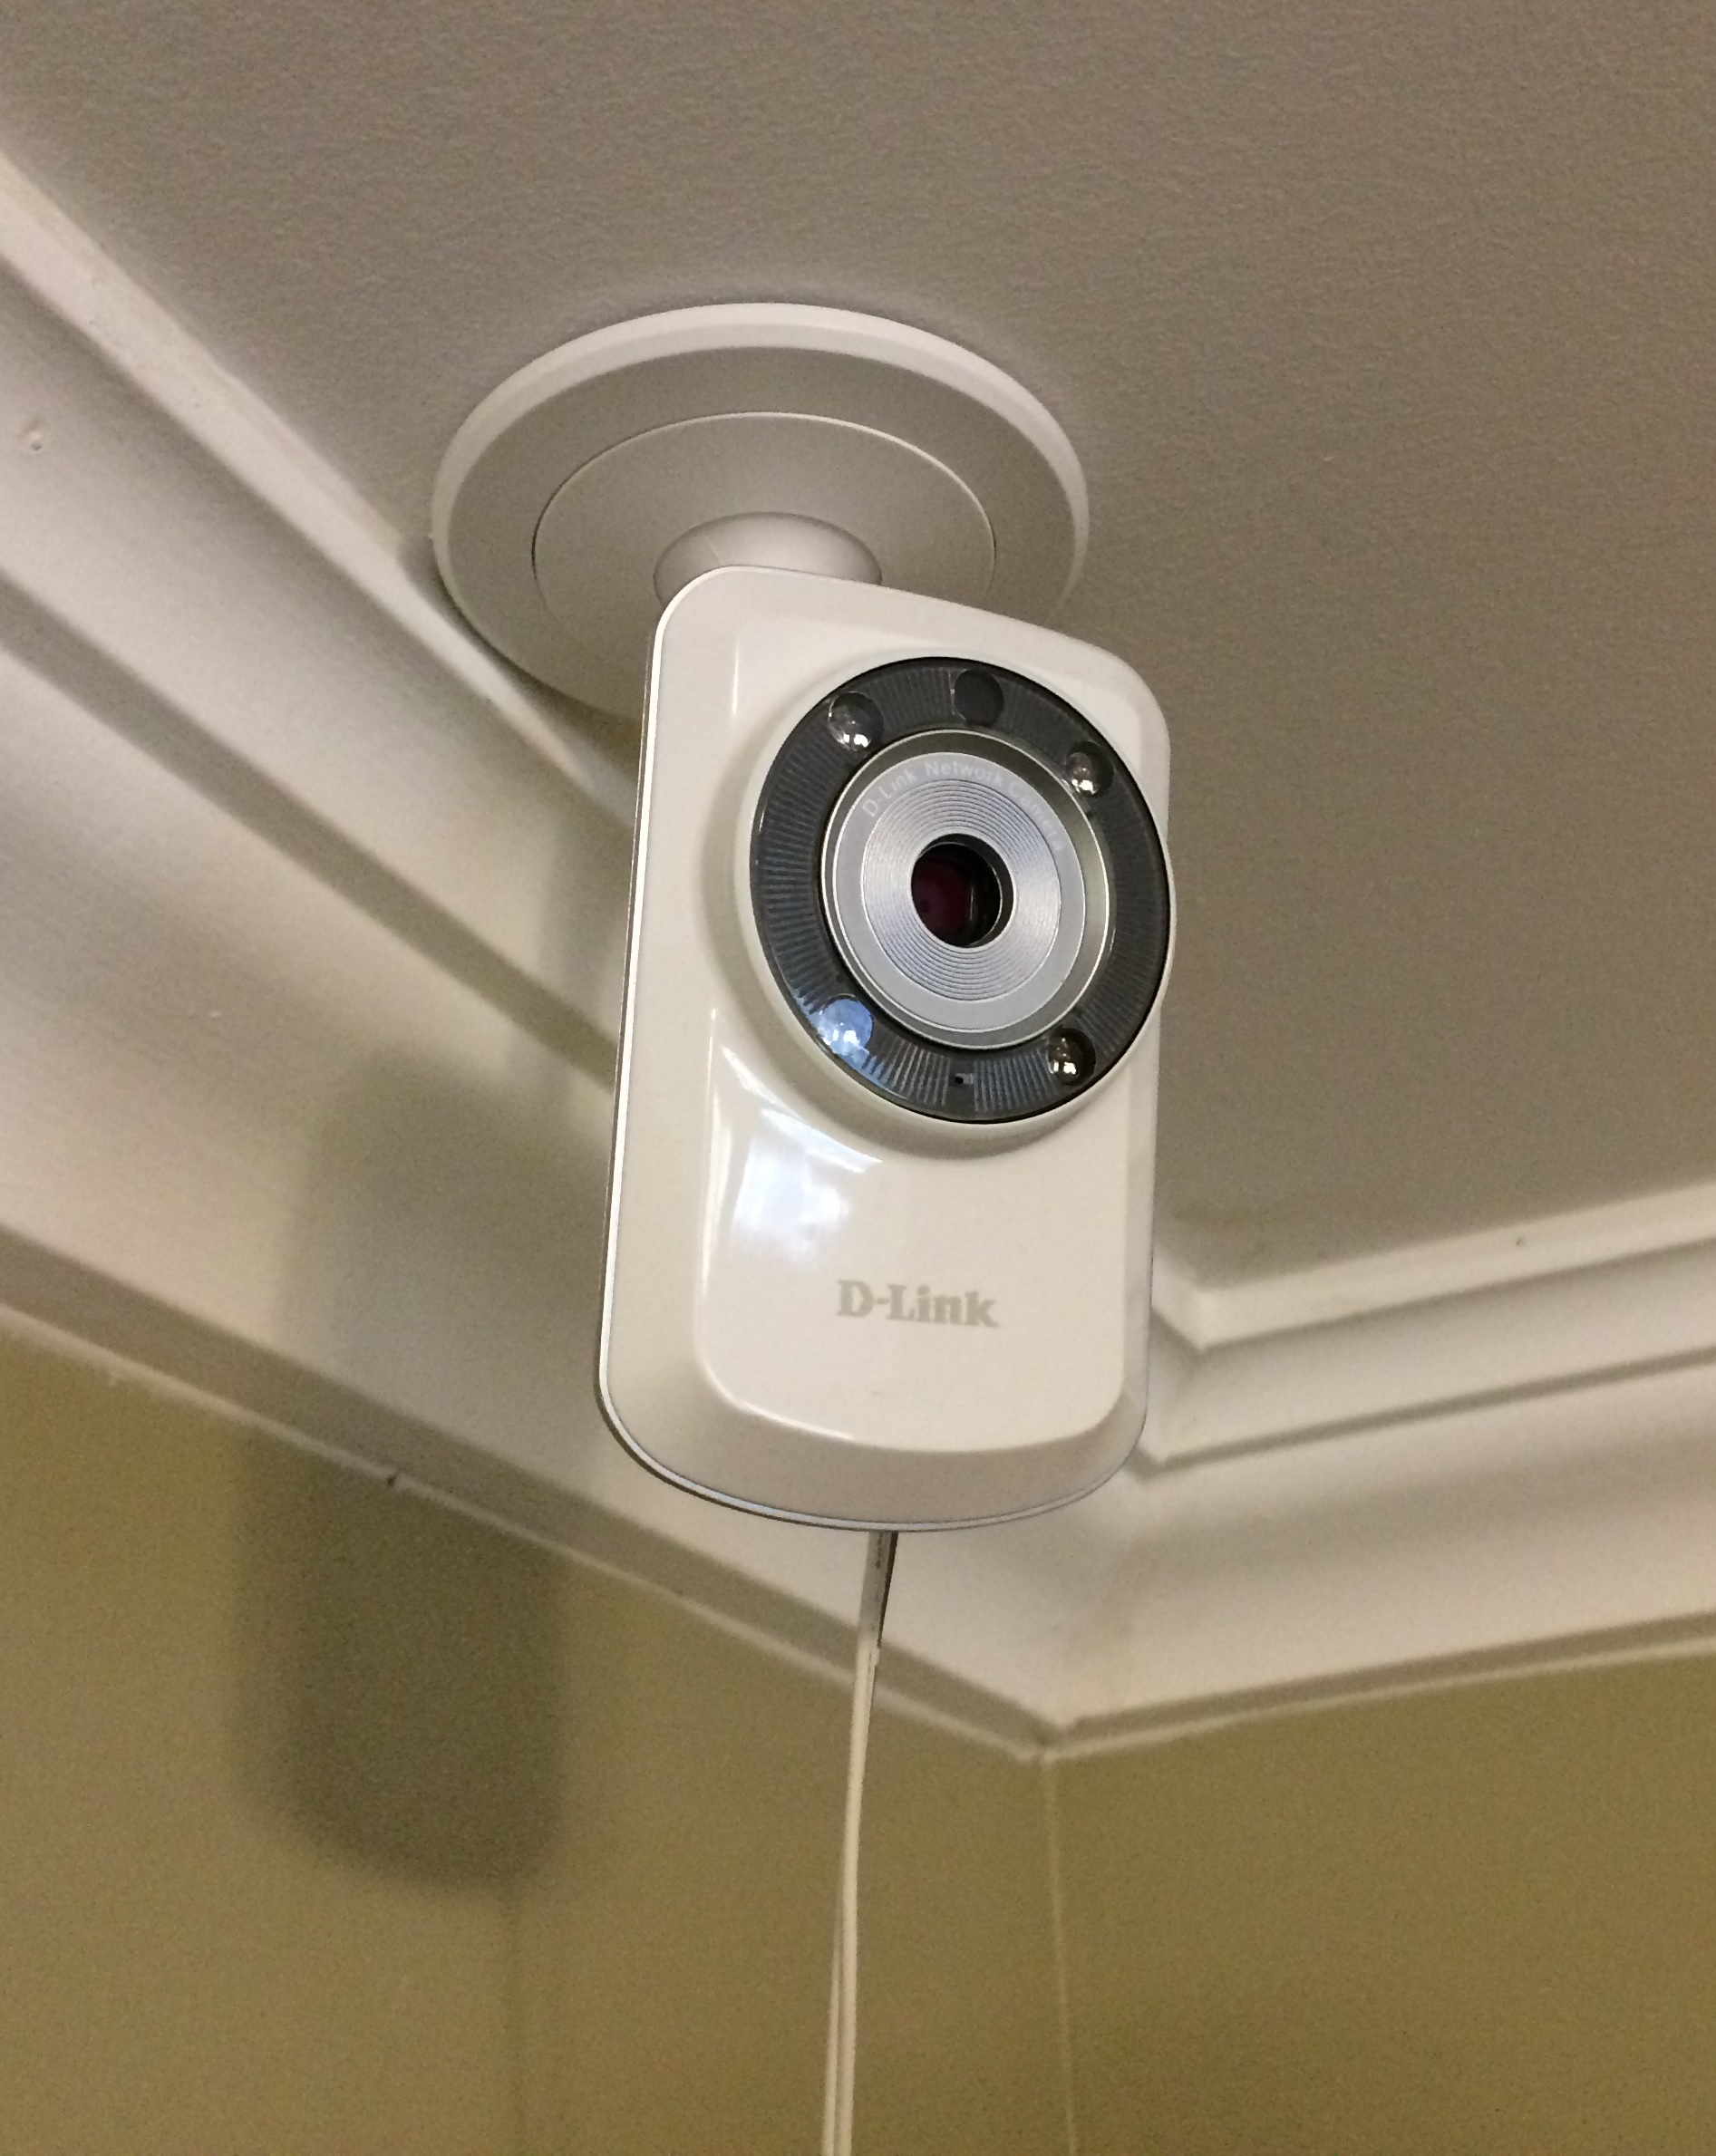 Wireless Security Camera: A Simple - Efficien Way to Secure Your Home